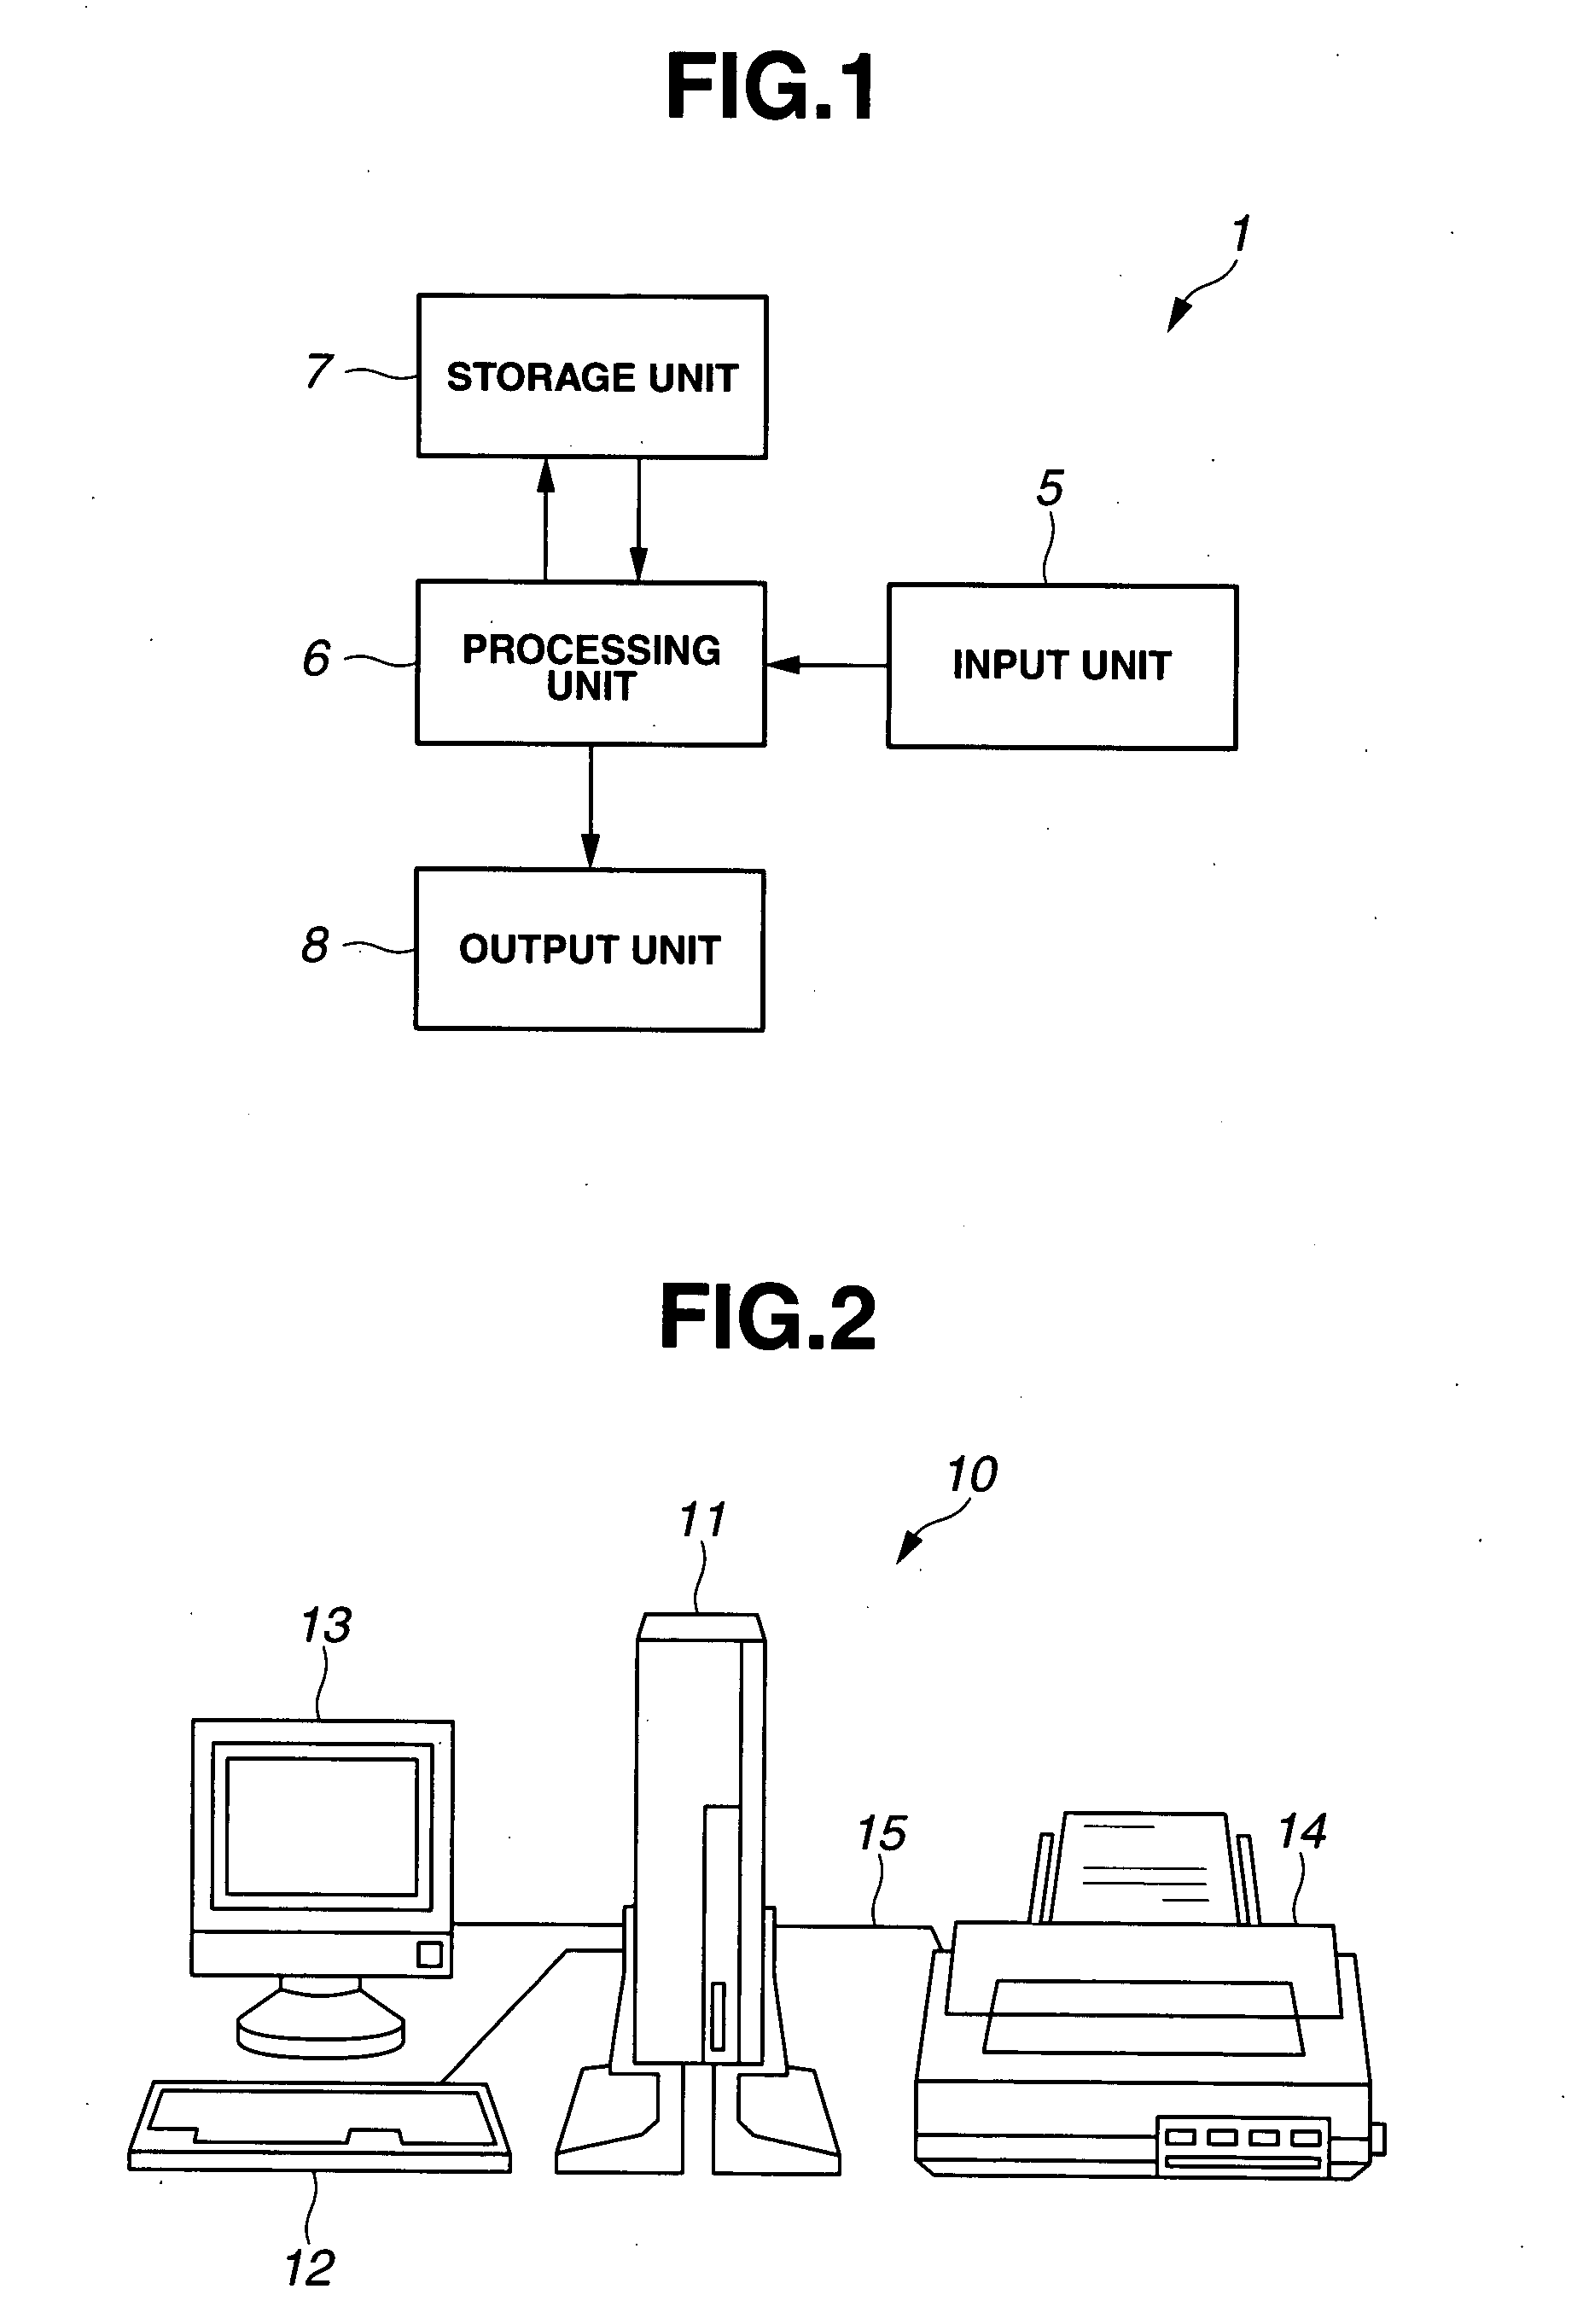 Gear pair evaluation apparatus, gear pair evaluation program, and gear pair whose tooth surfaces are evaluated using the apparatus and program